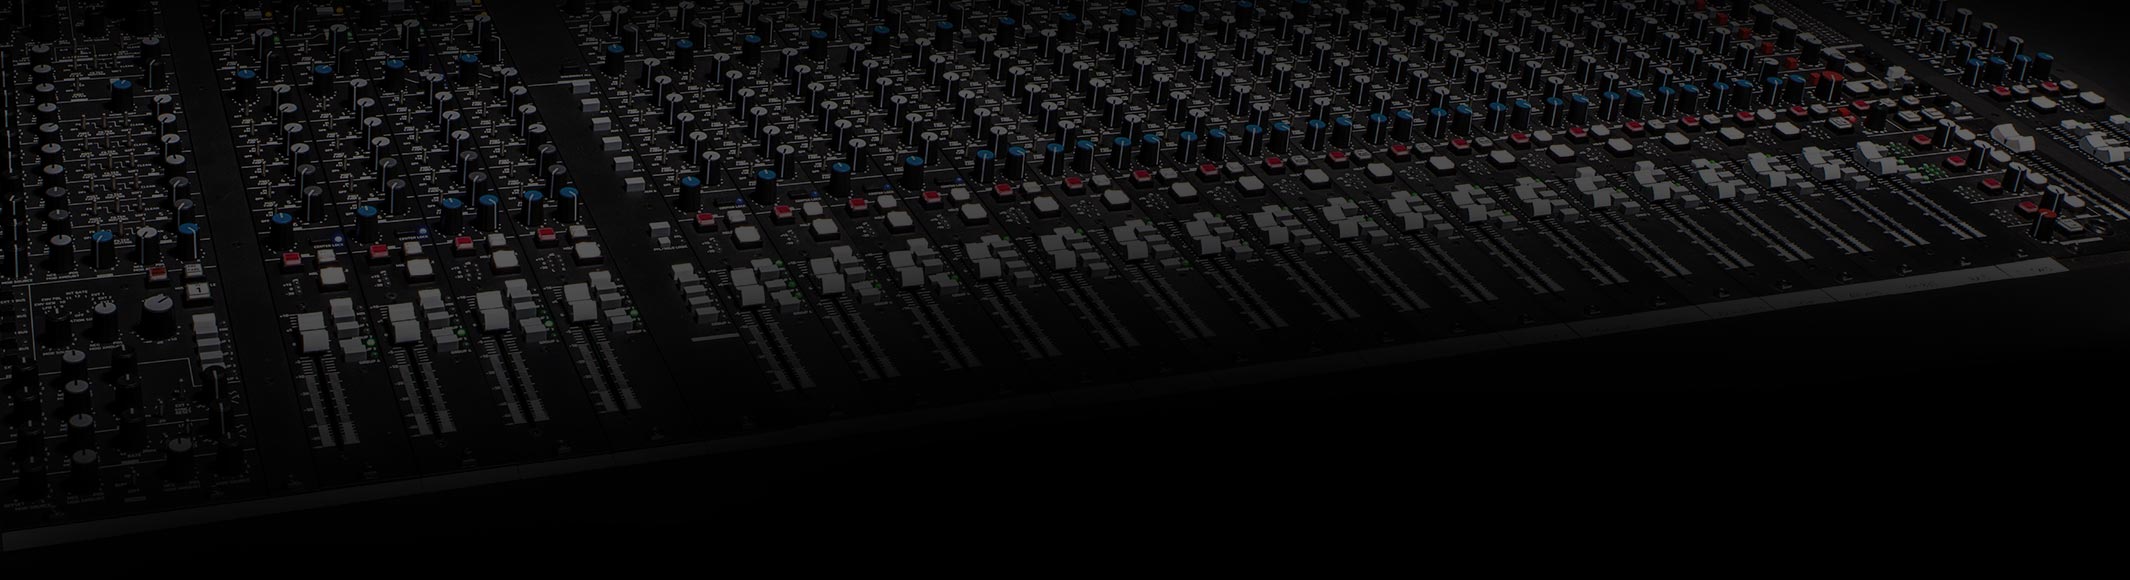 AM1 Mixing Console Product Shot